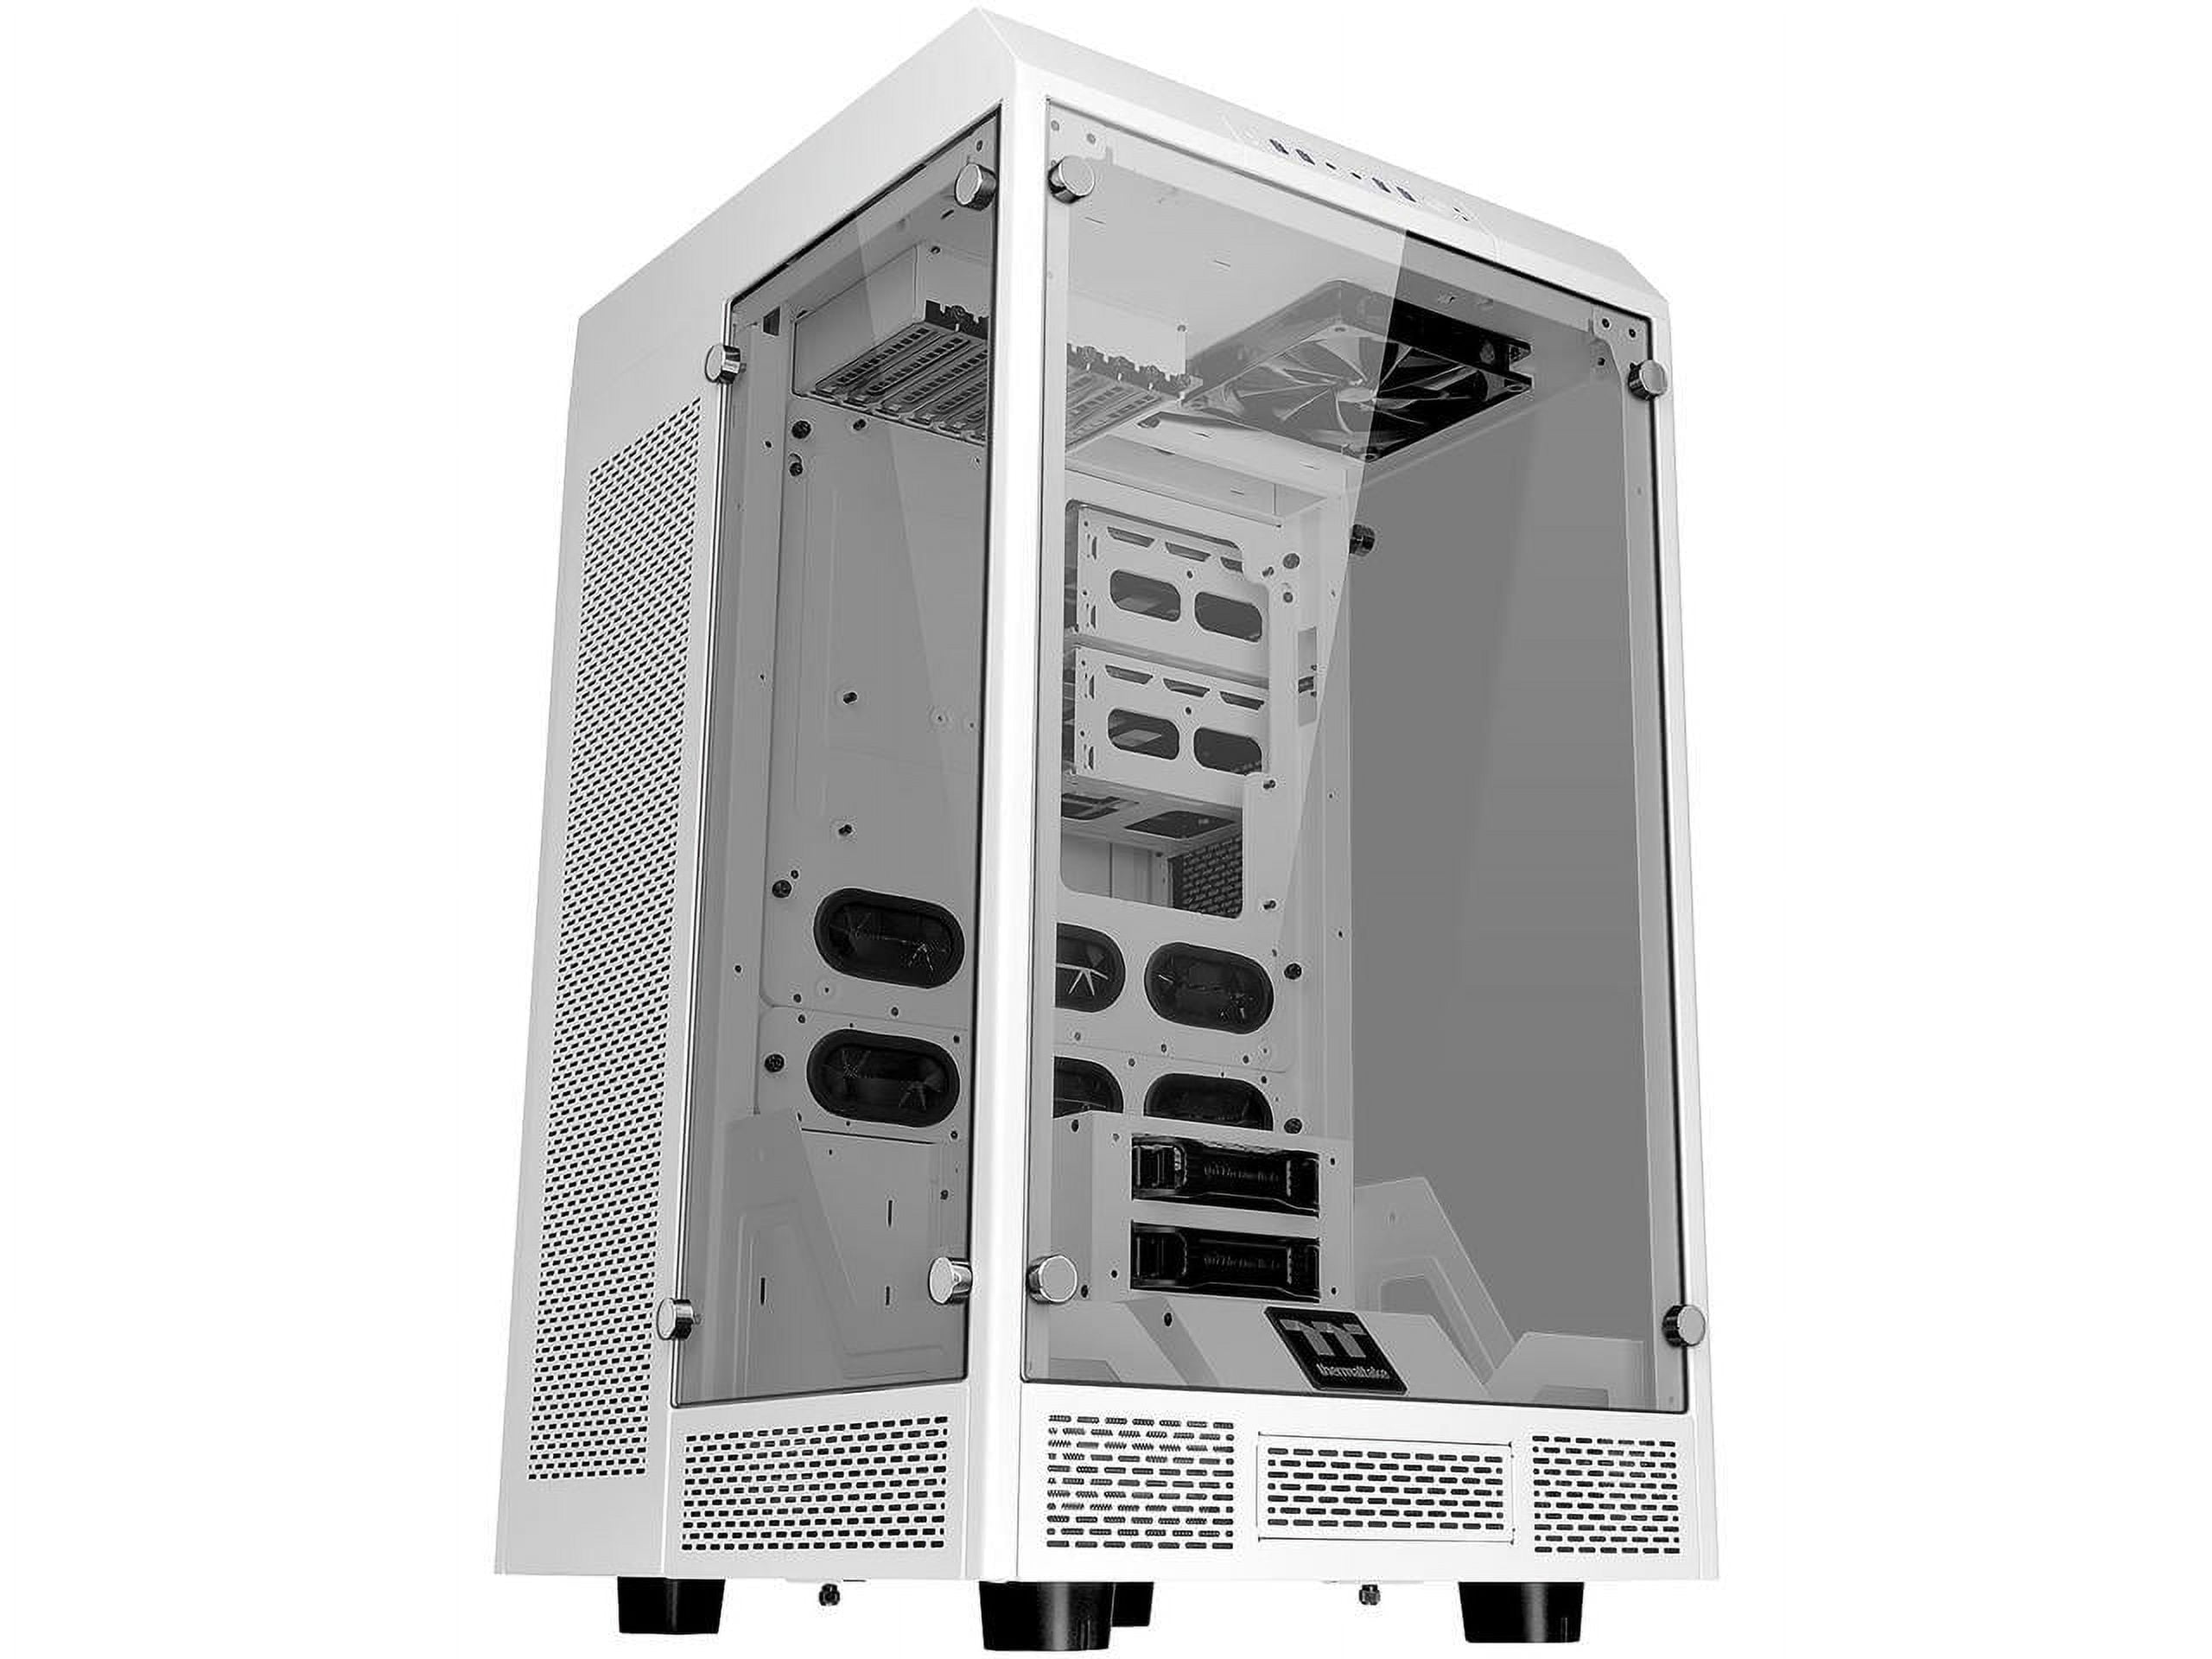 BOITIER THERMALTAKE THE TOWER 900 TG WHITE